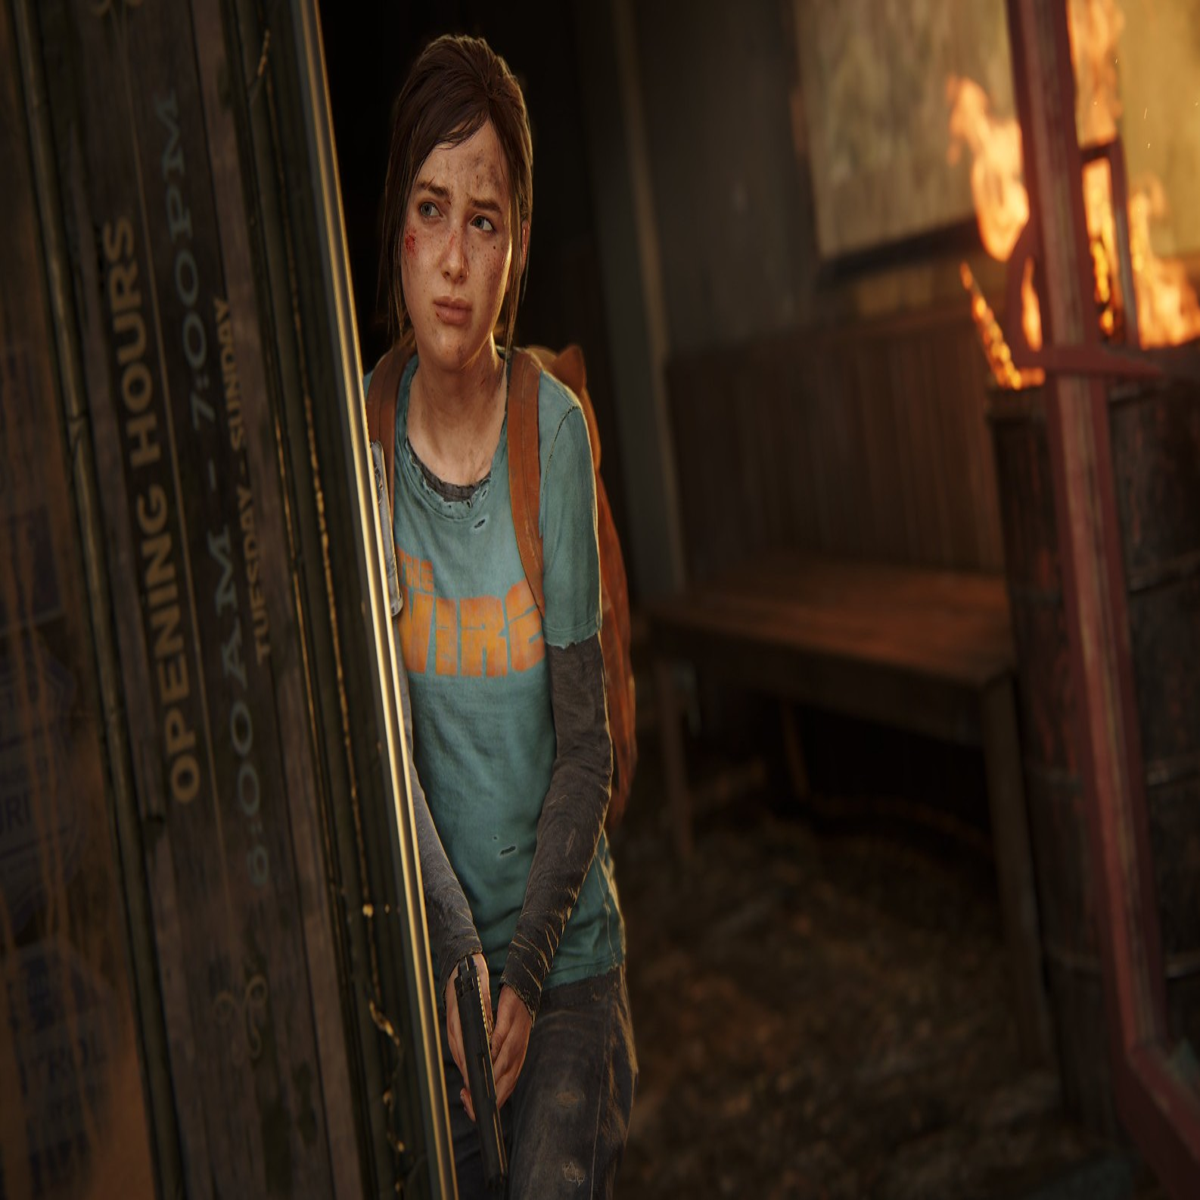 Ellie - The Last of us part 1 (Remake) in 2023